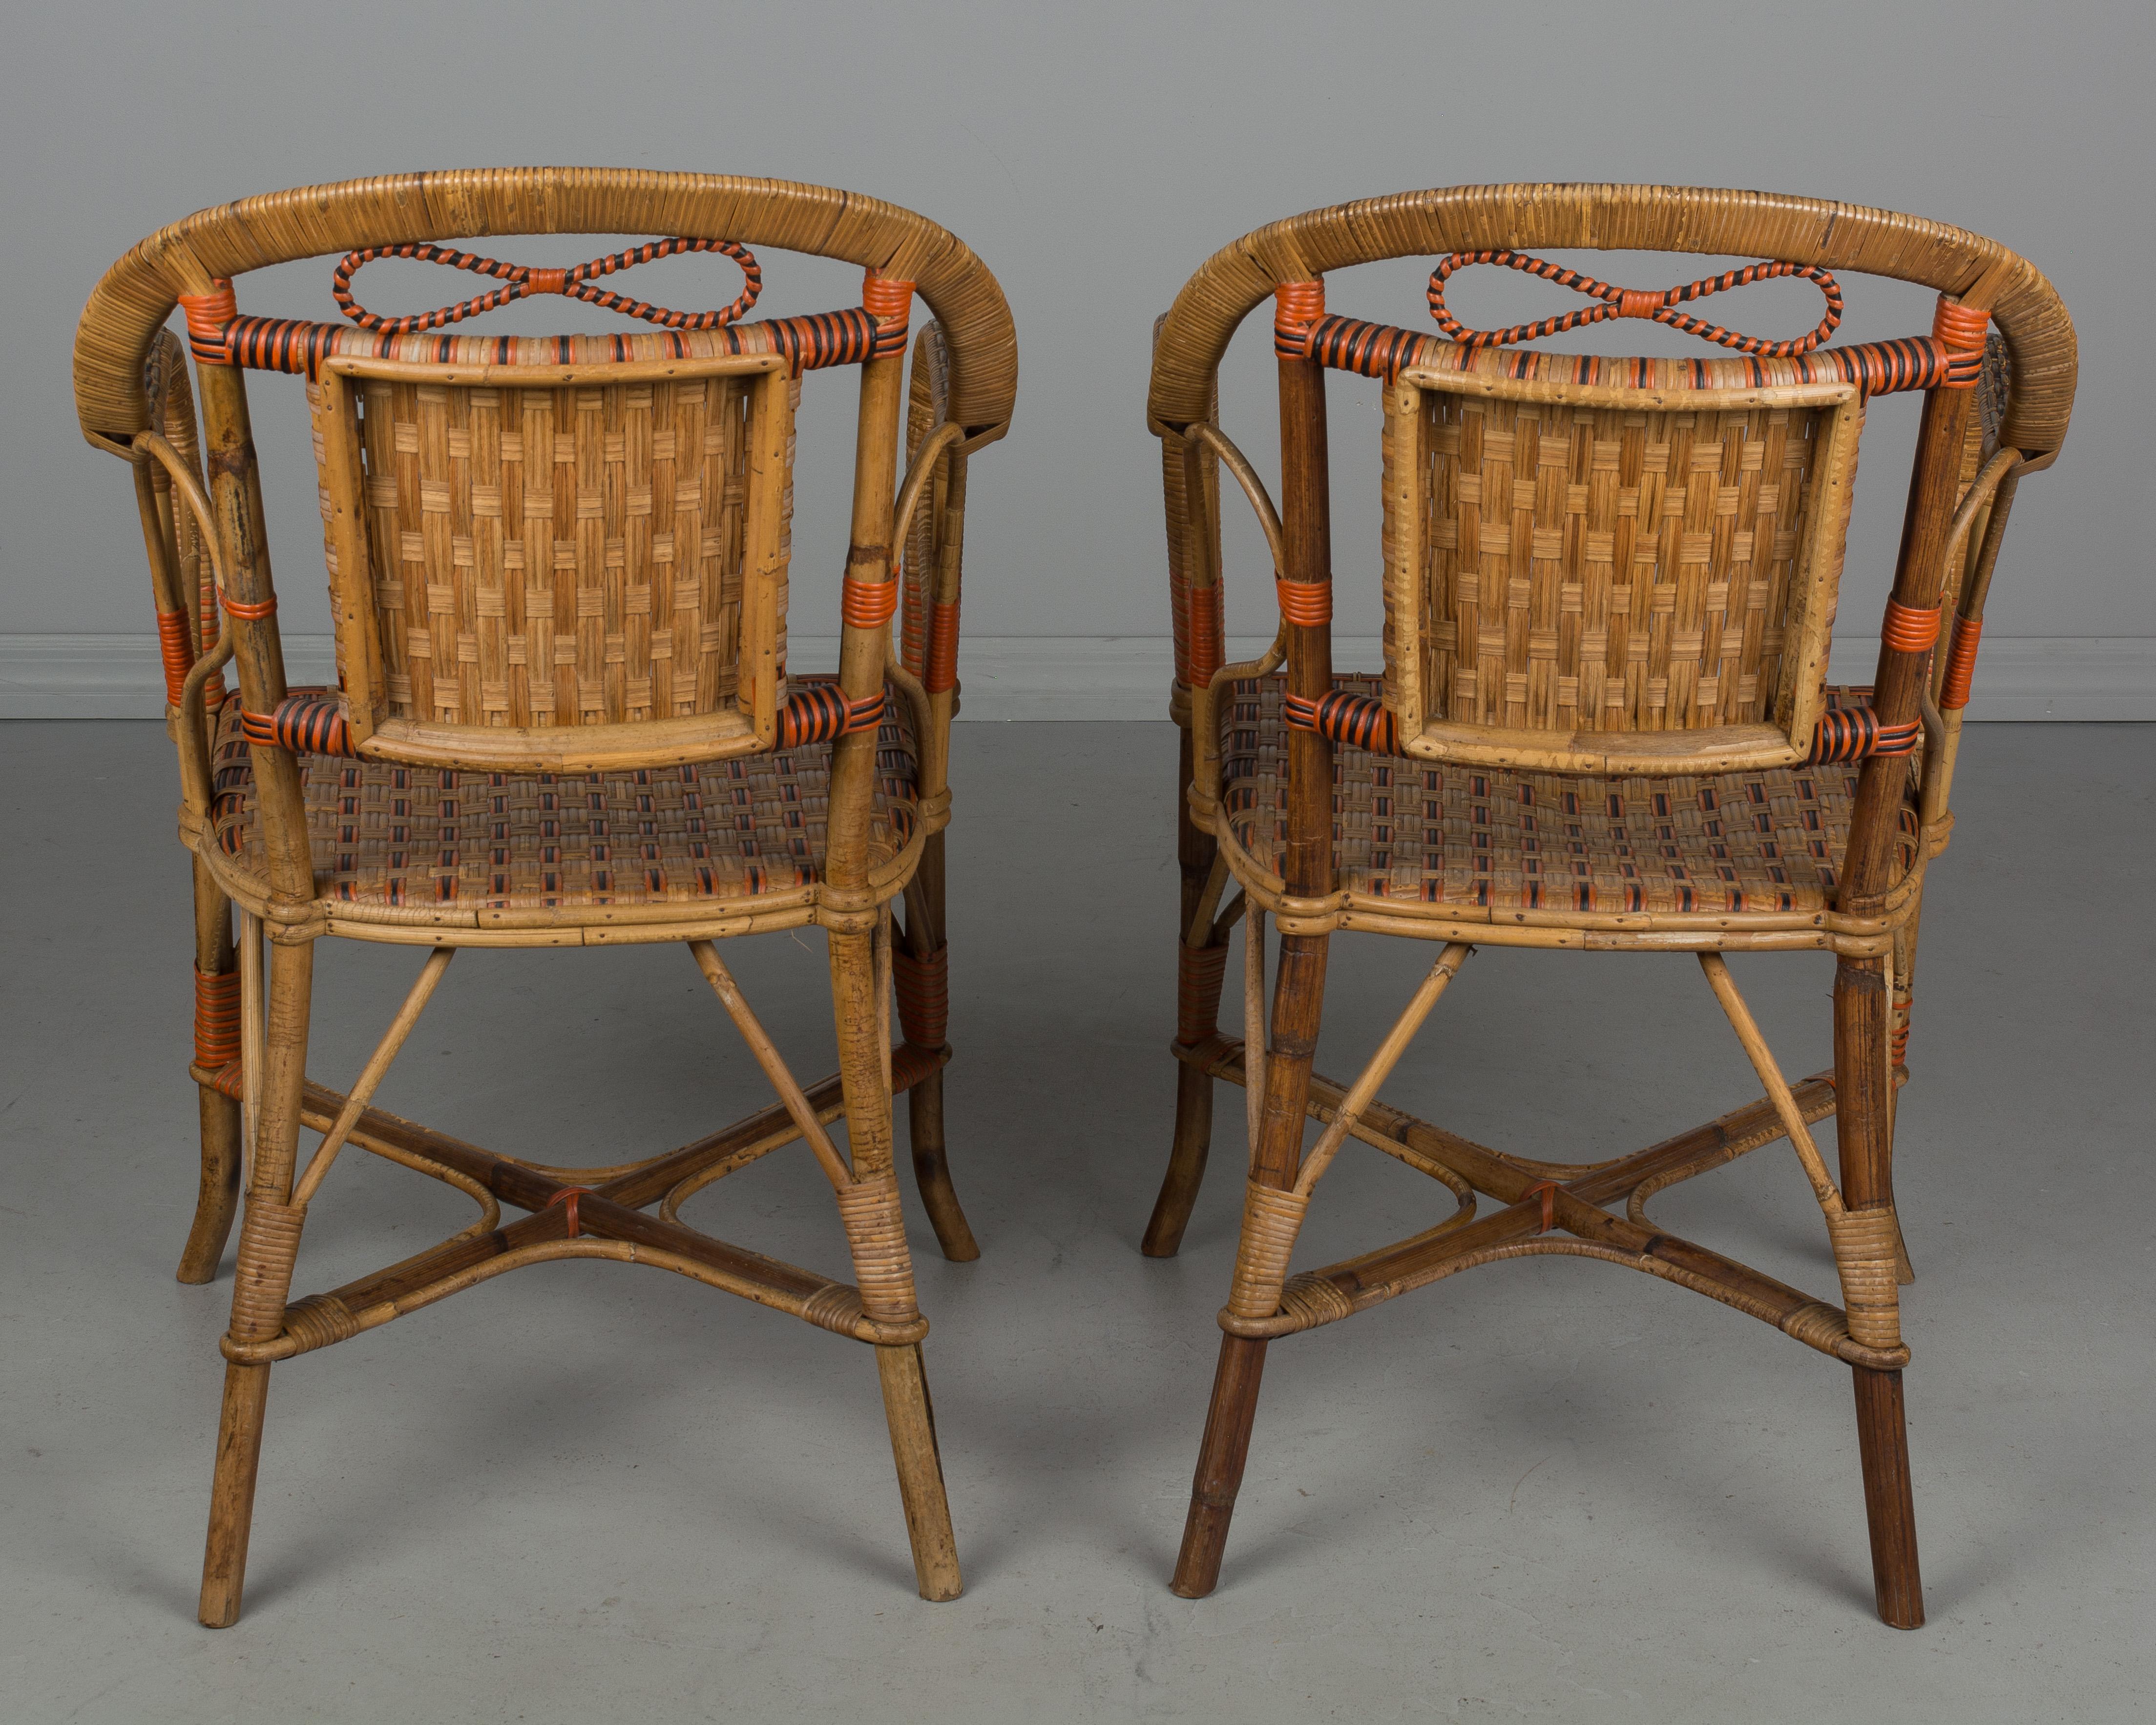 Bamboo 19th Century French Wicker Rattan Dining Set